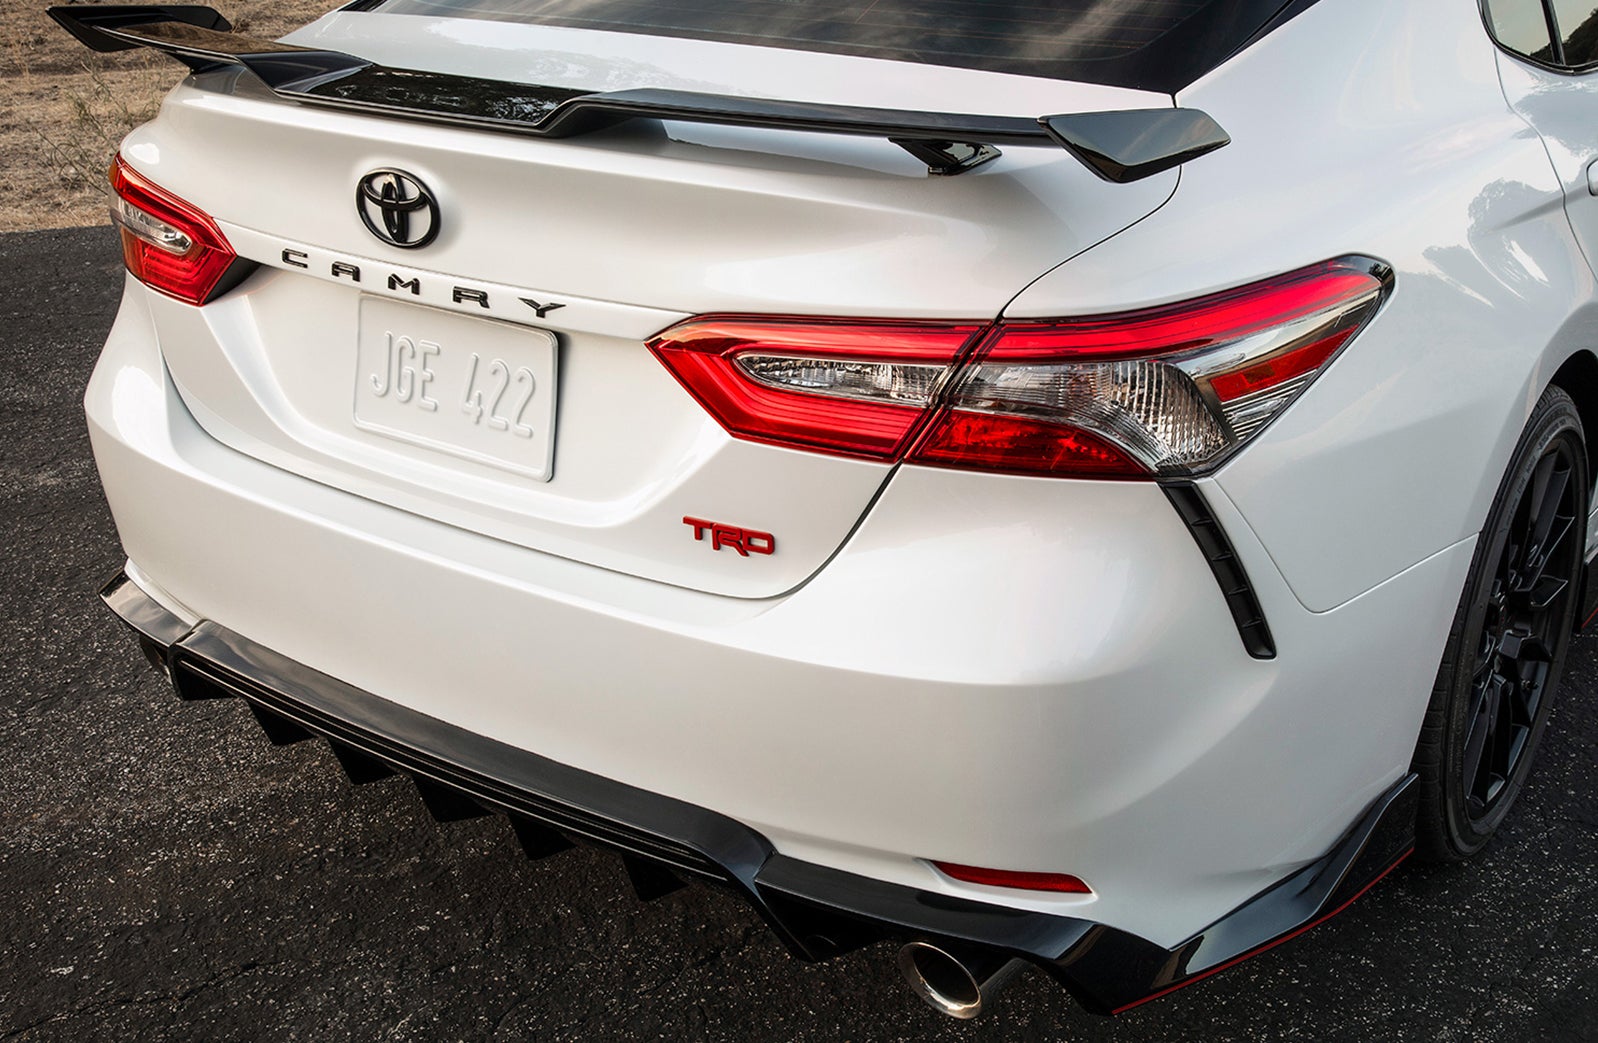 What you can get to personalize your vehicle at Fiore Toyota in Hollidaysburg | the tailend of the white 2020 camry